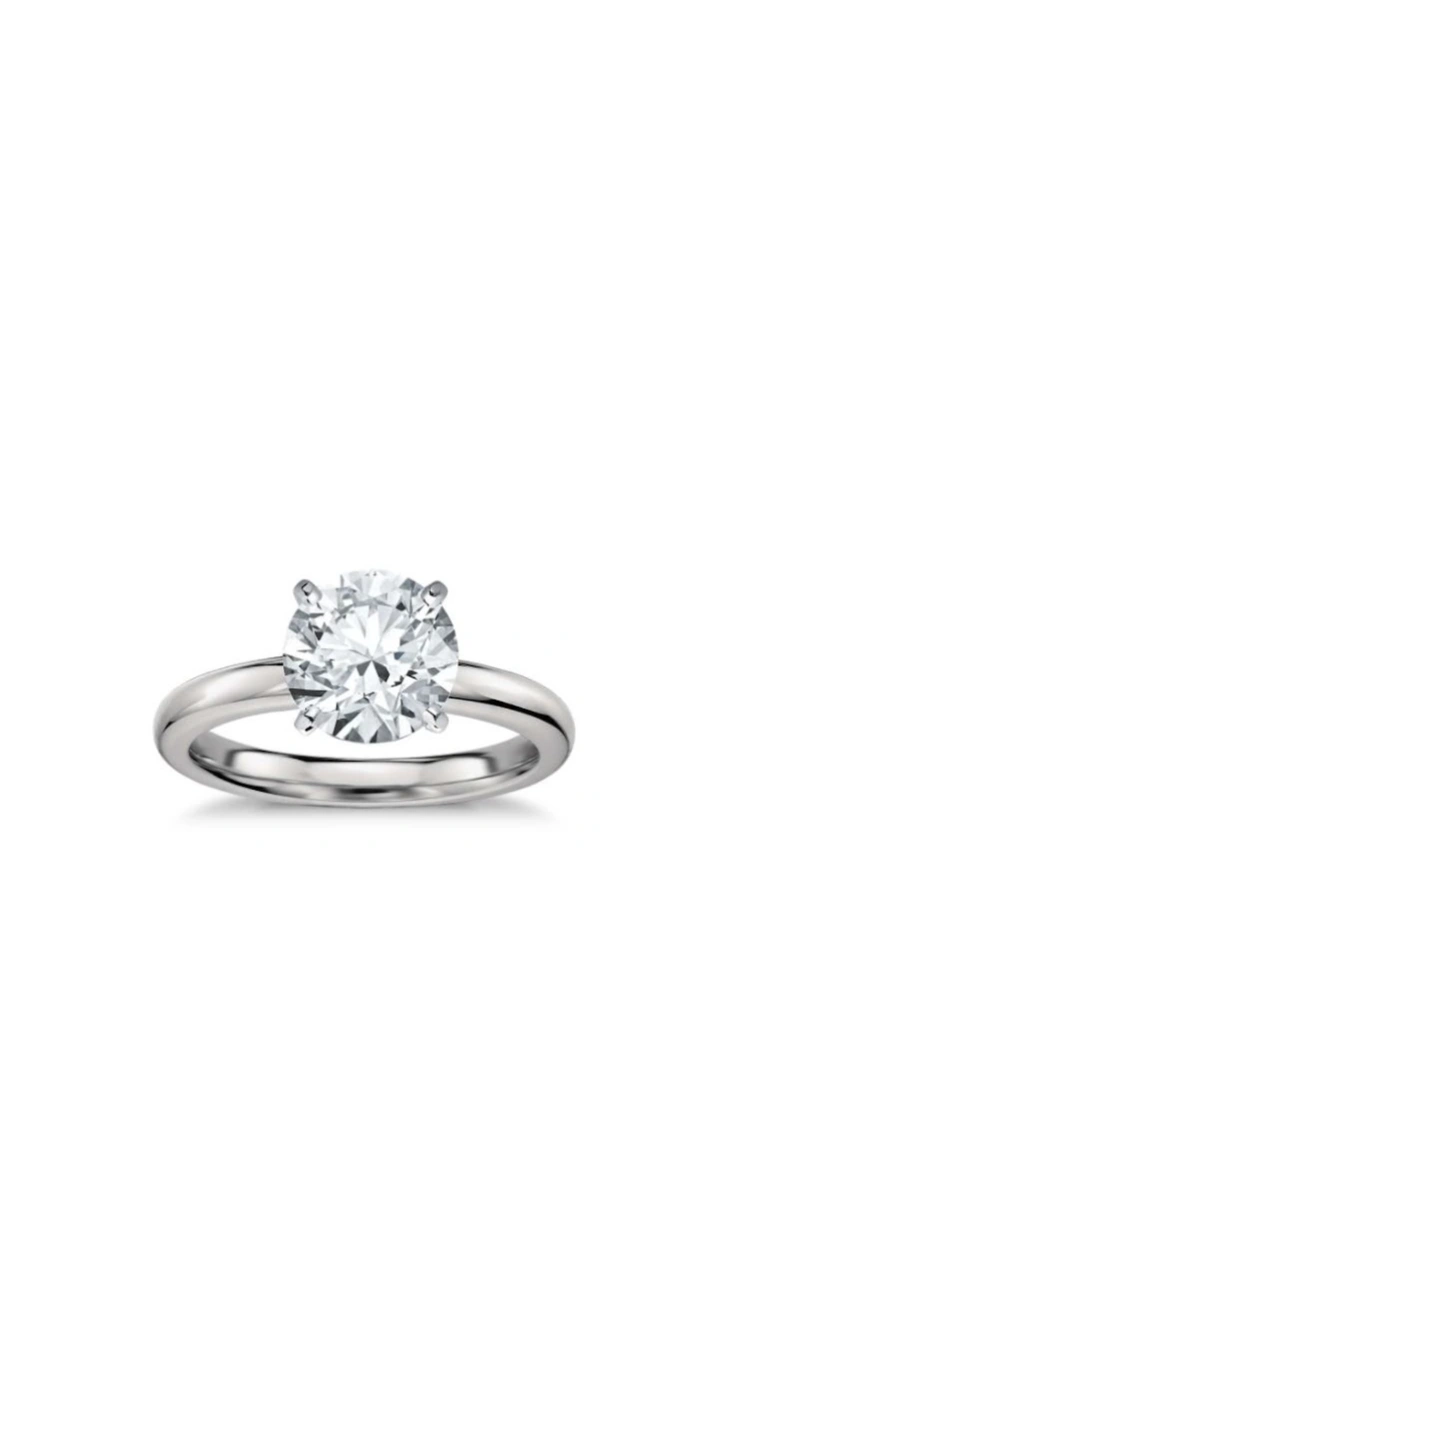 Sell diamonds, sell rolex watch, jewelry appraisal, sell engagement ring, sell diamond ring